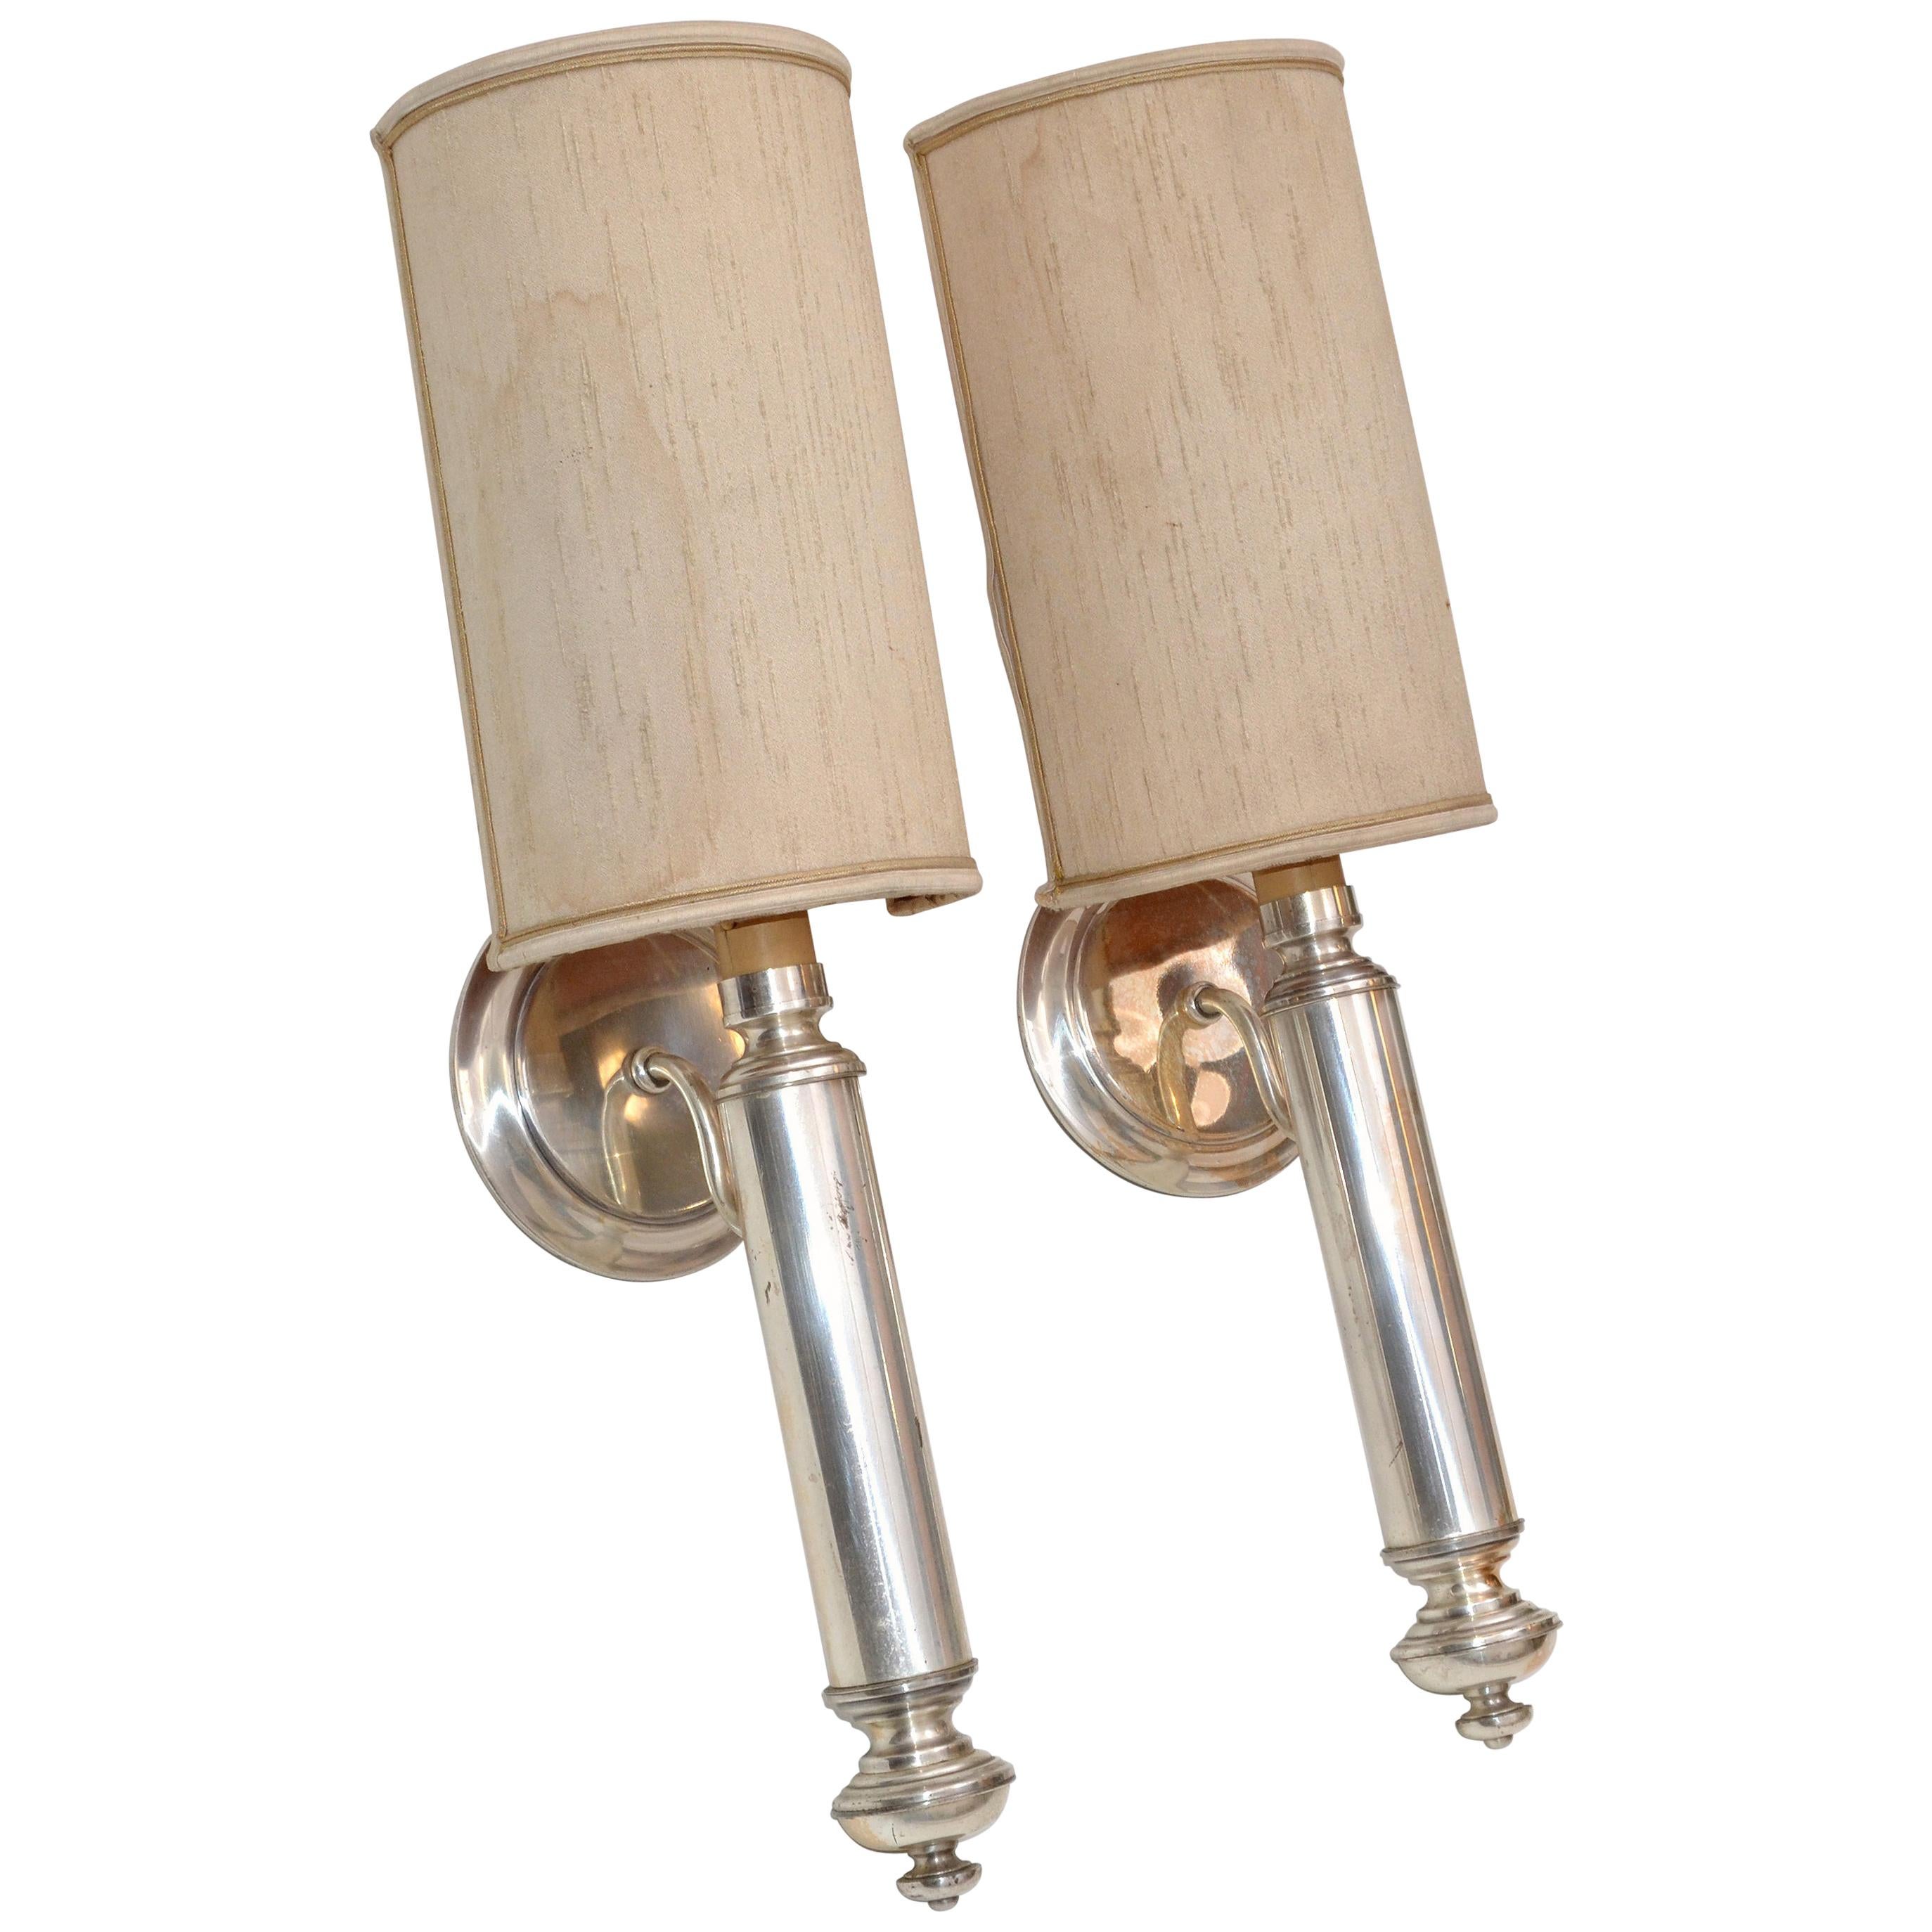 Vintage Maison Lancel Wall Sconces Silver Finish with Original Half Shade, Pair For Sale